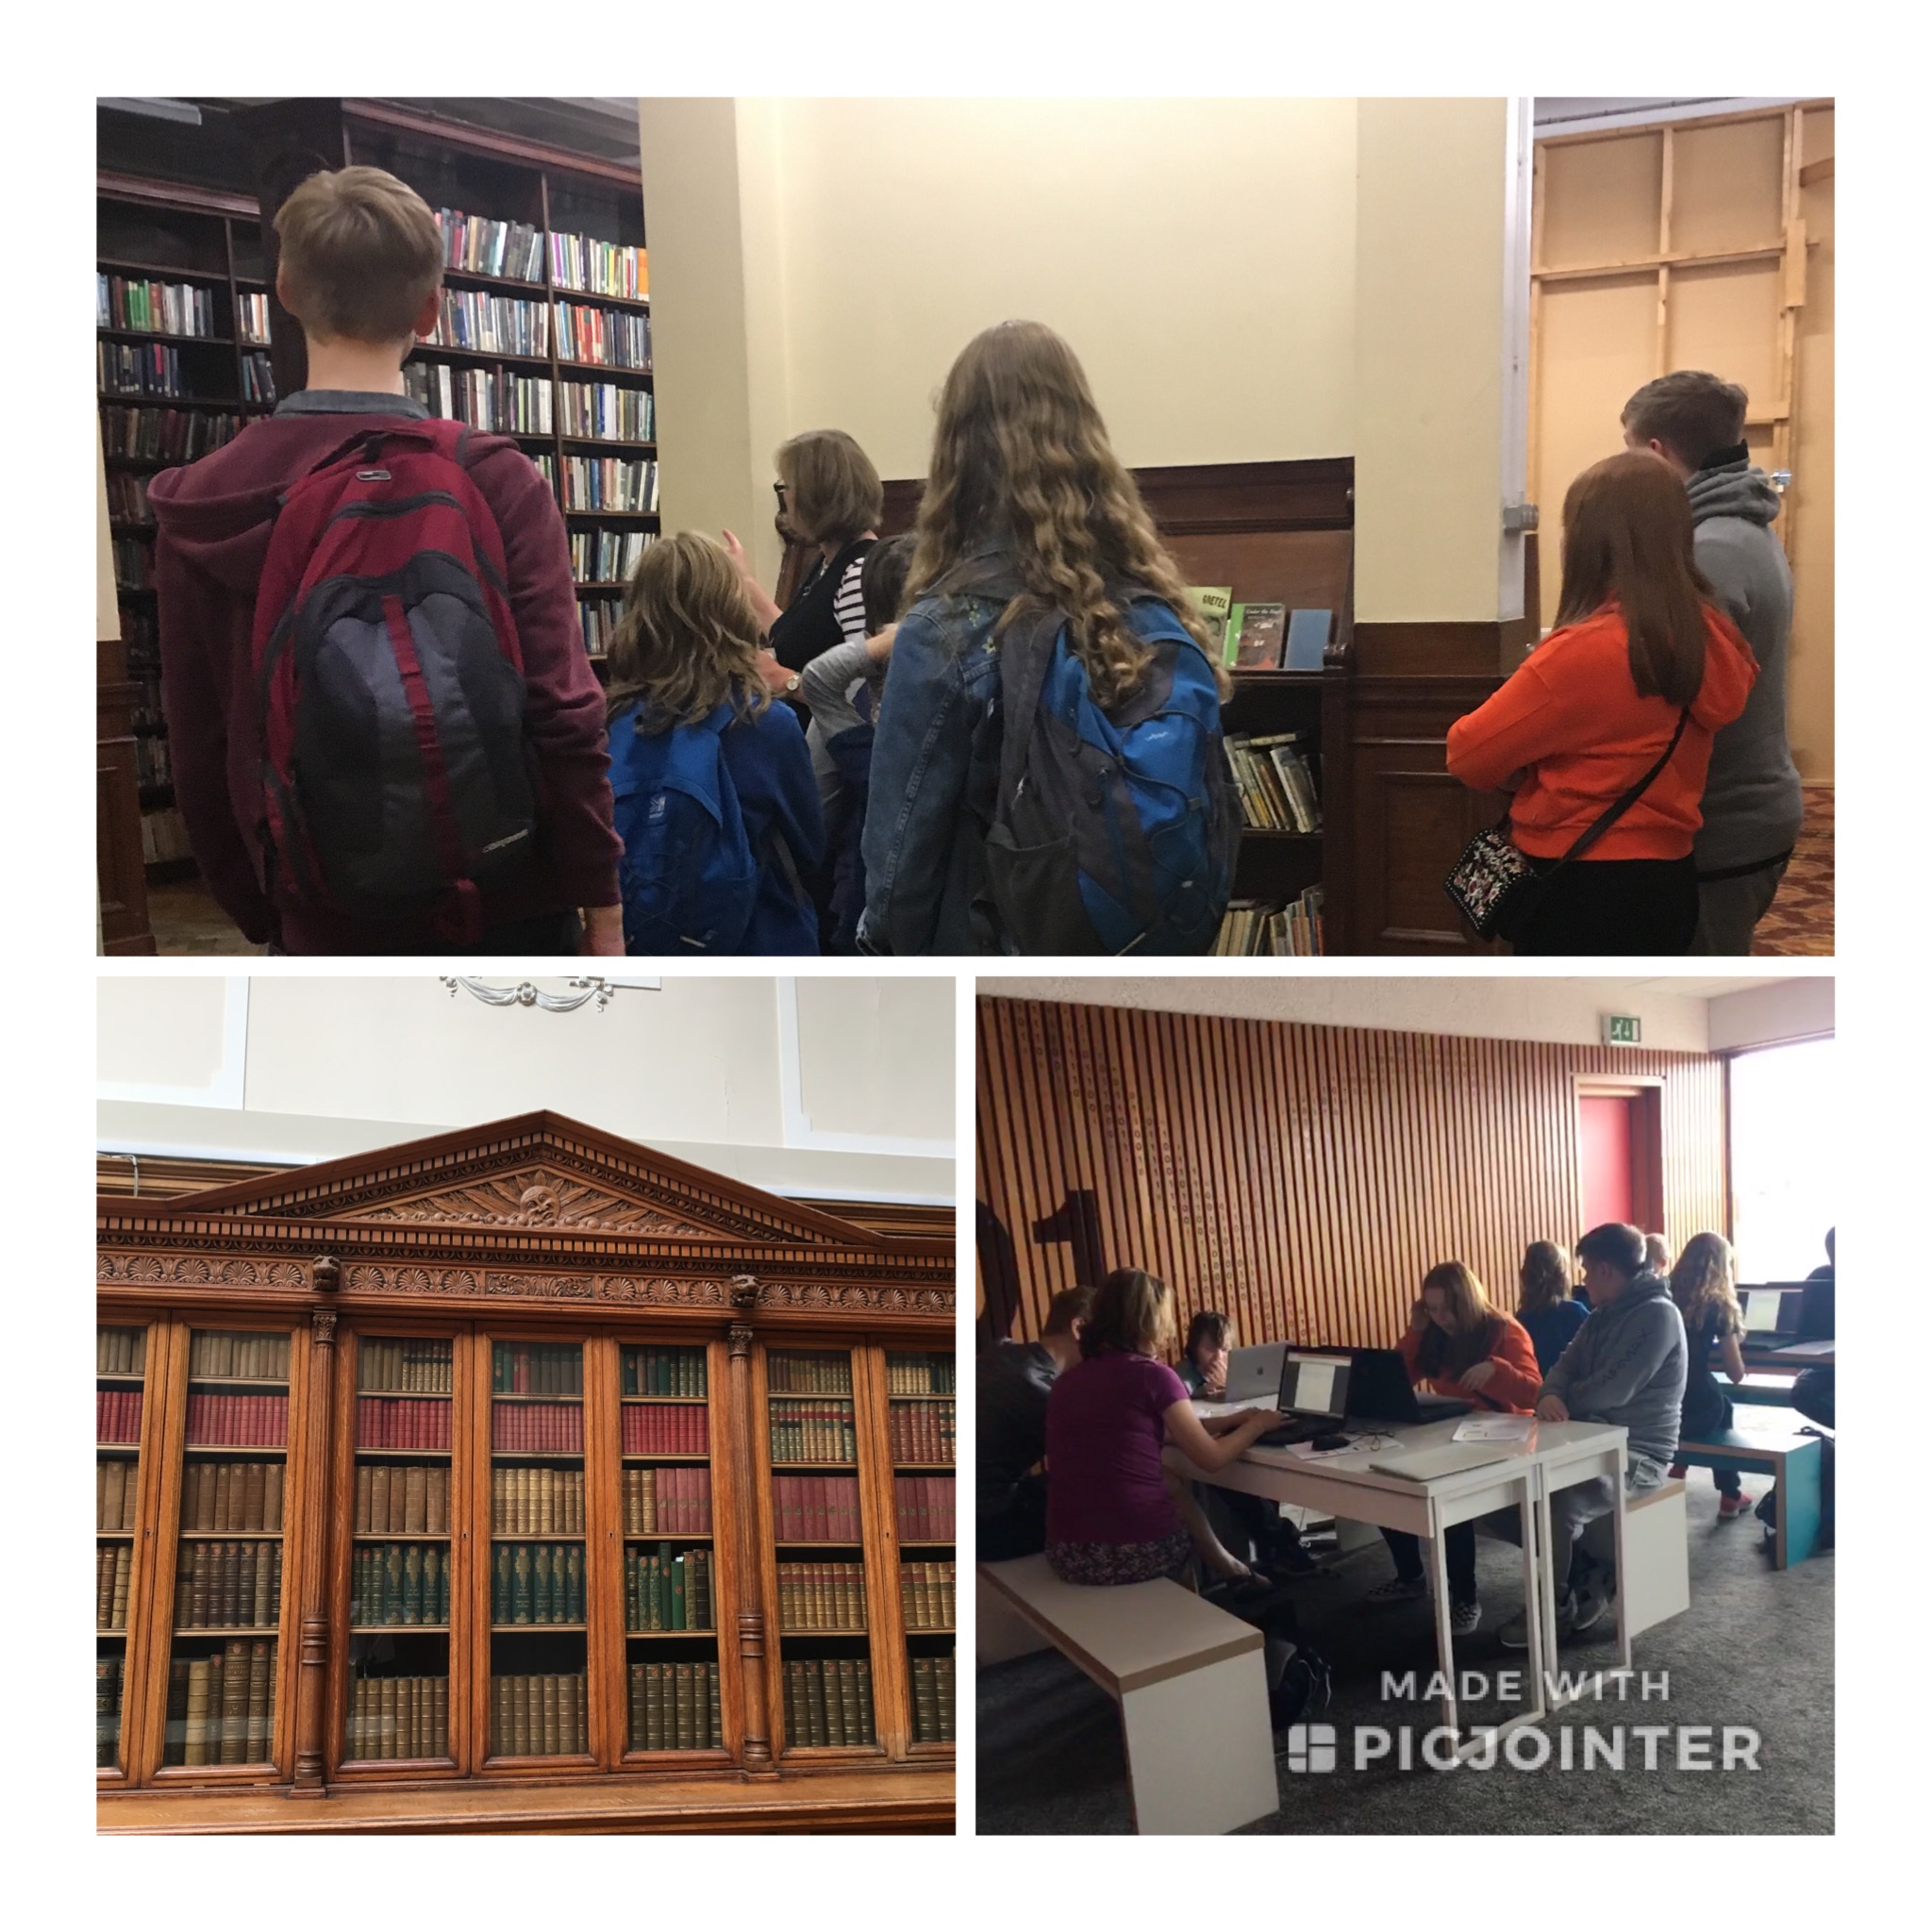 Behind the scenes at the Mitchell Library